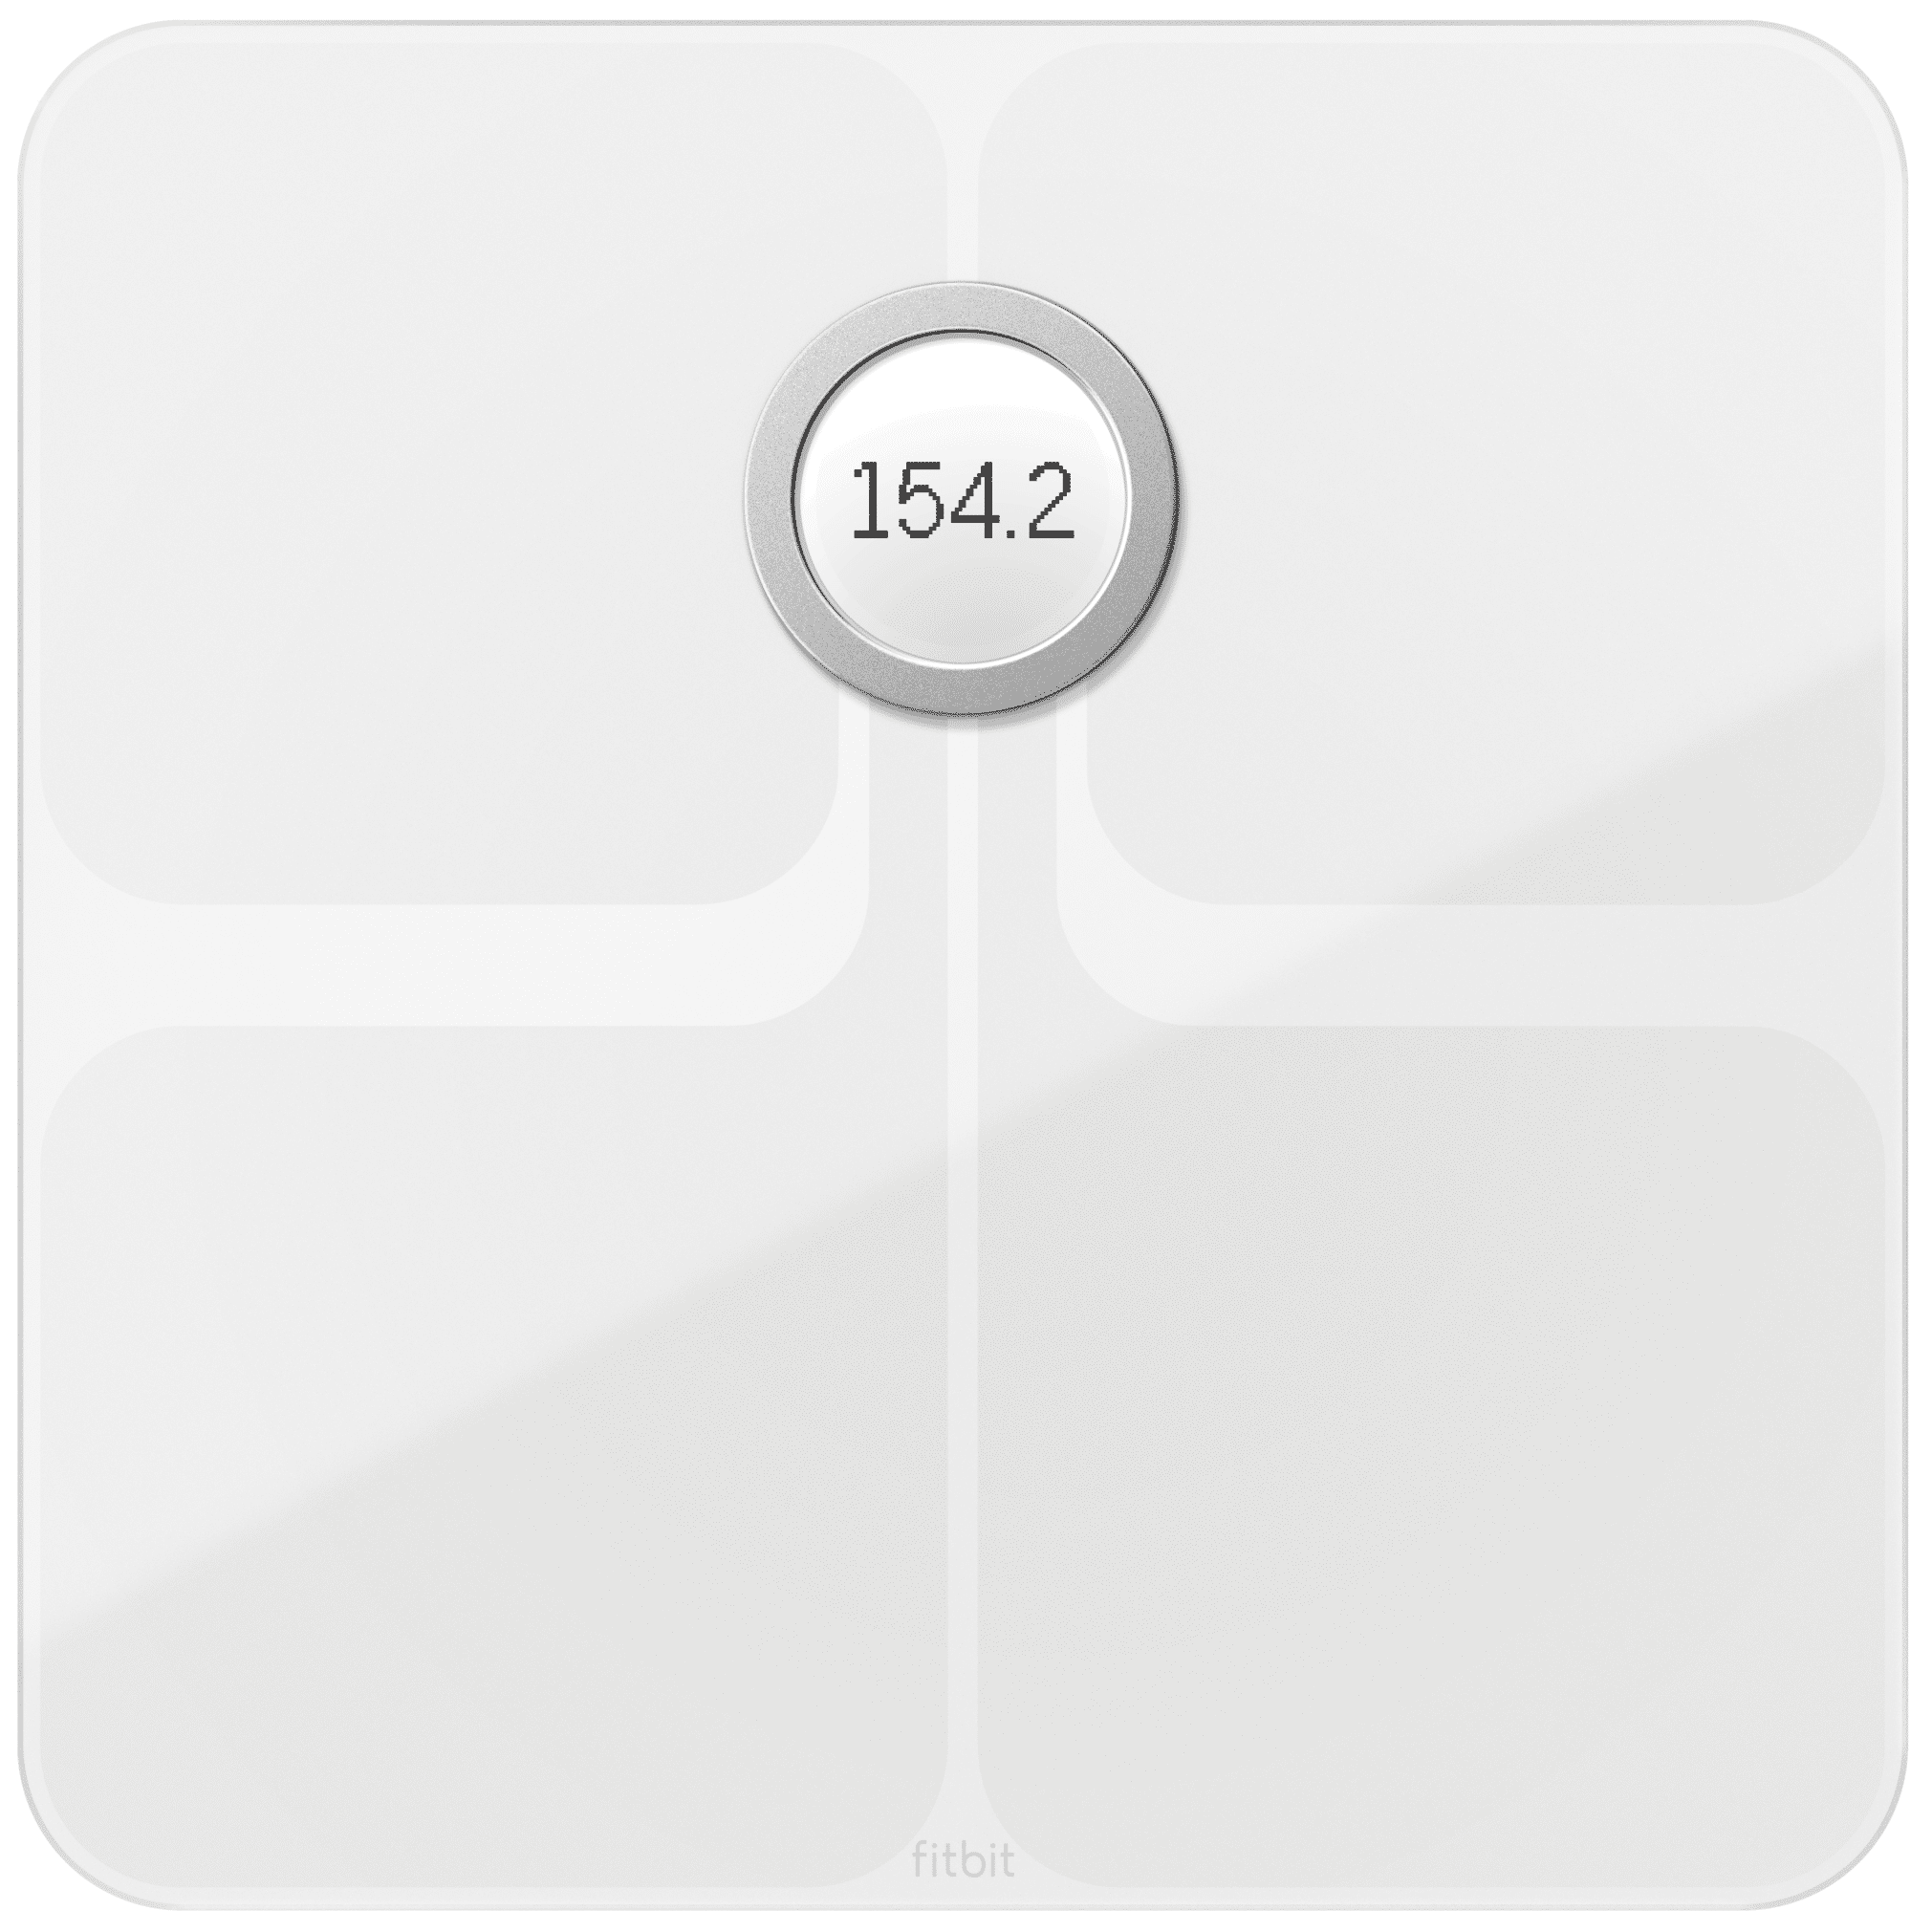 Fitbit Aria Bathroom Scale Review - Consumer Reports